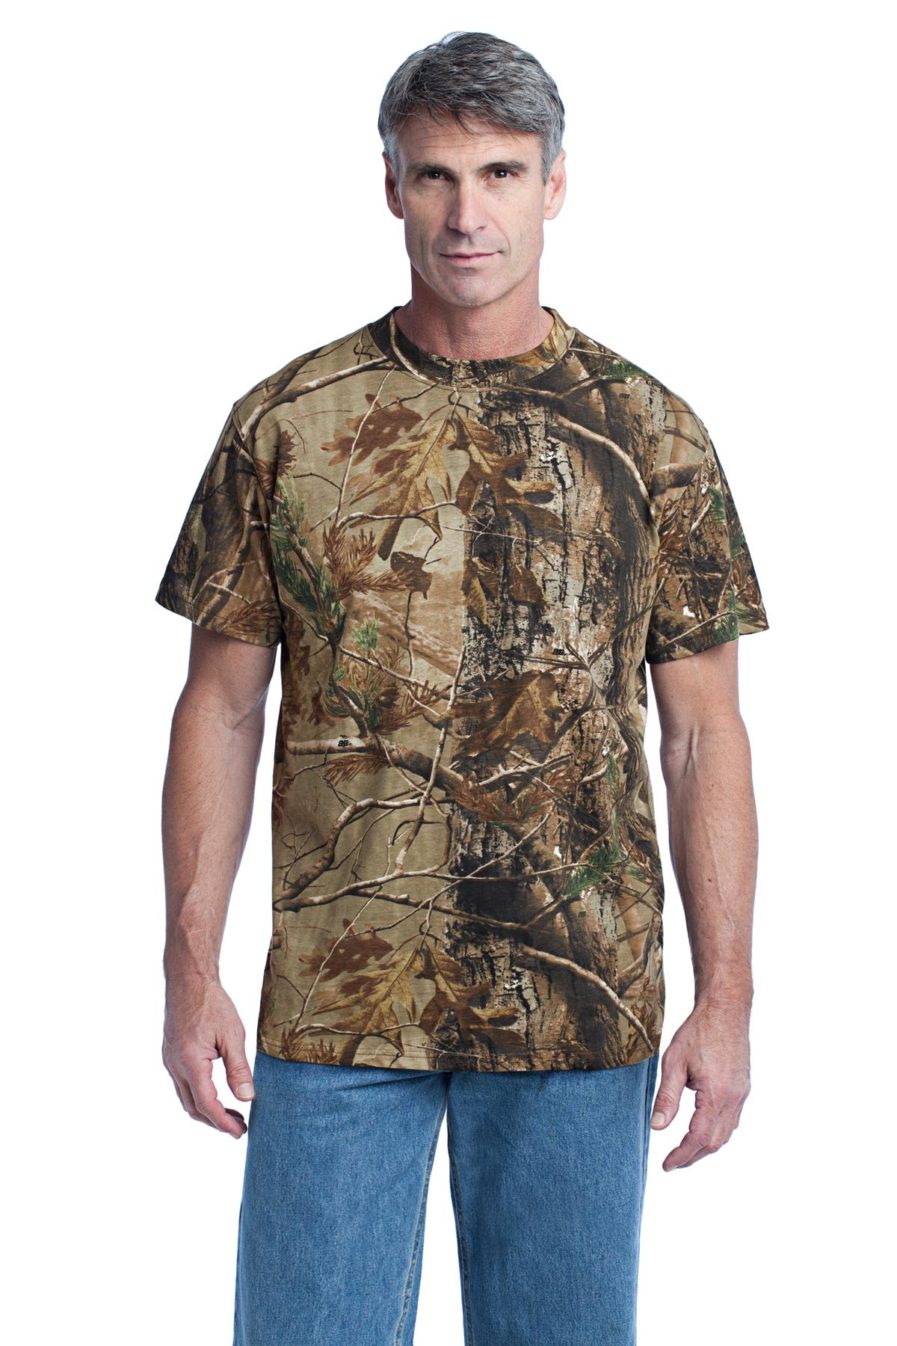 NP0021R - Russell Outdoors - Realtree Explorer 100 Cotton T-Shirt ...